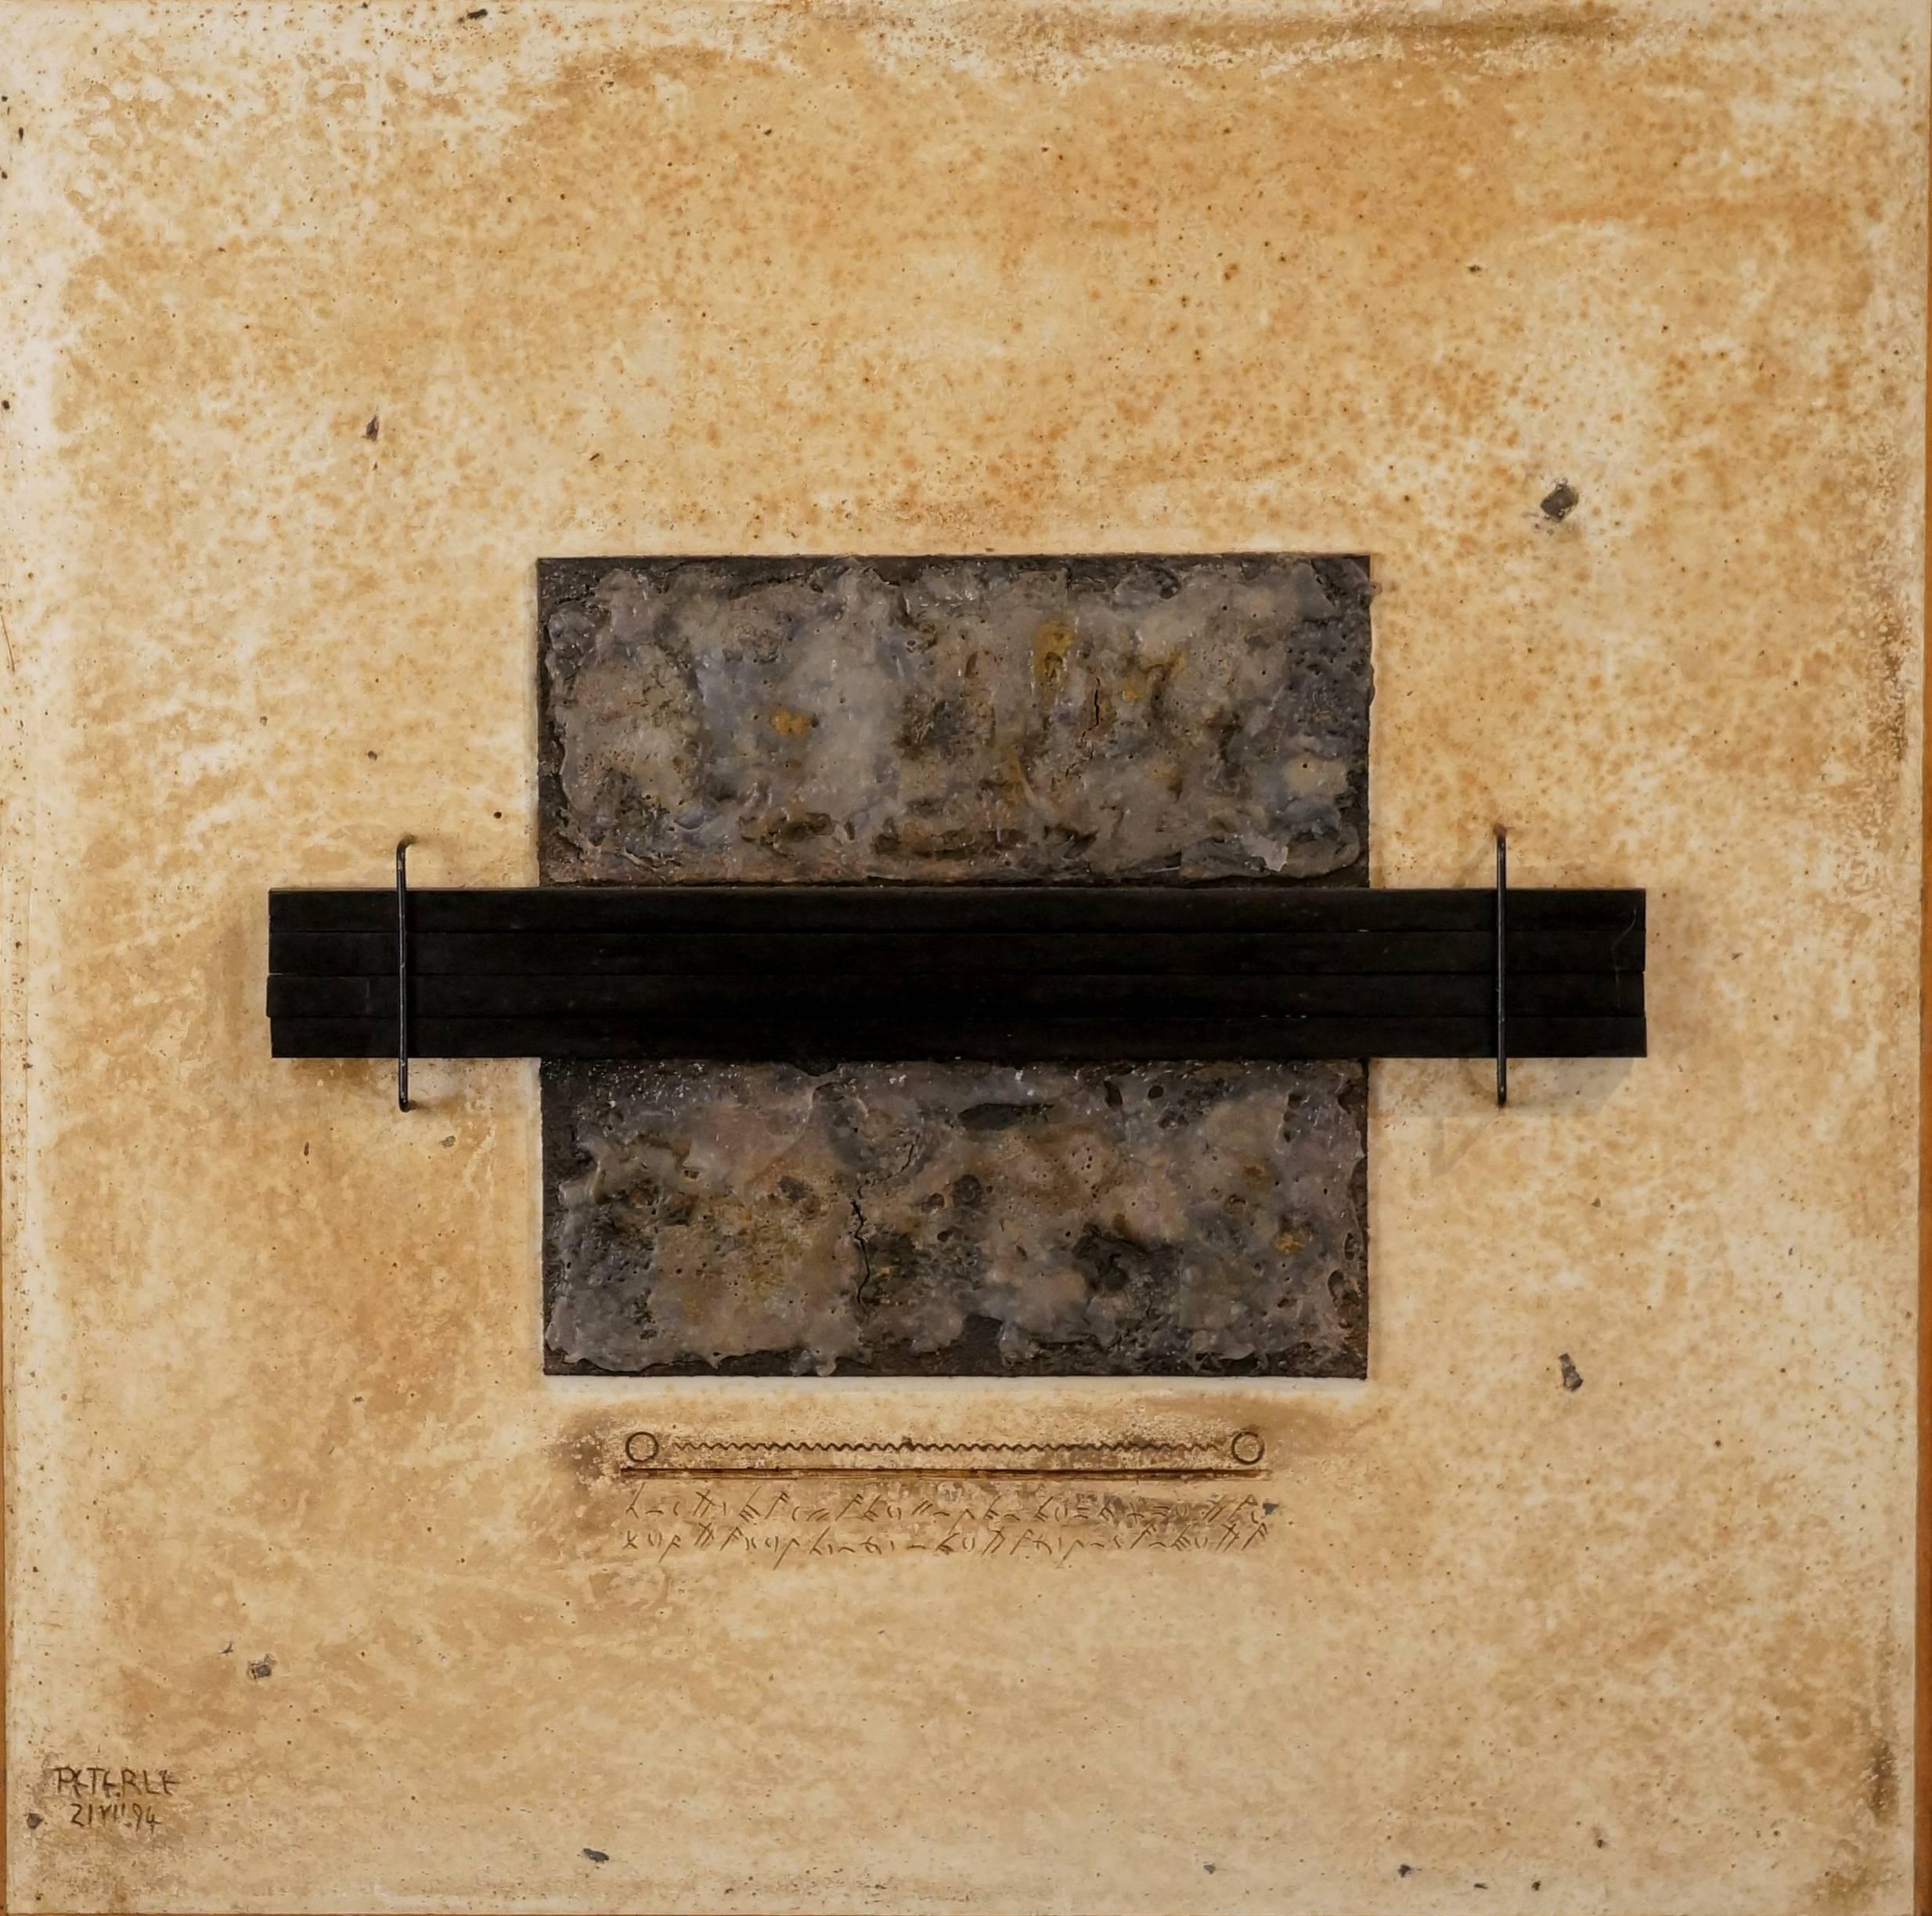 Abstract Composition II, 1994 - mixed media, 72x72 cm. - Mixed Media Art by Paolo Peterlé